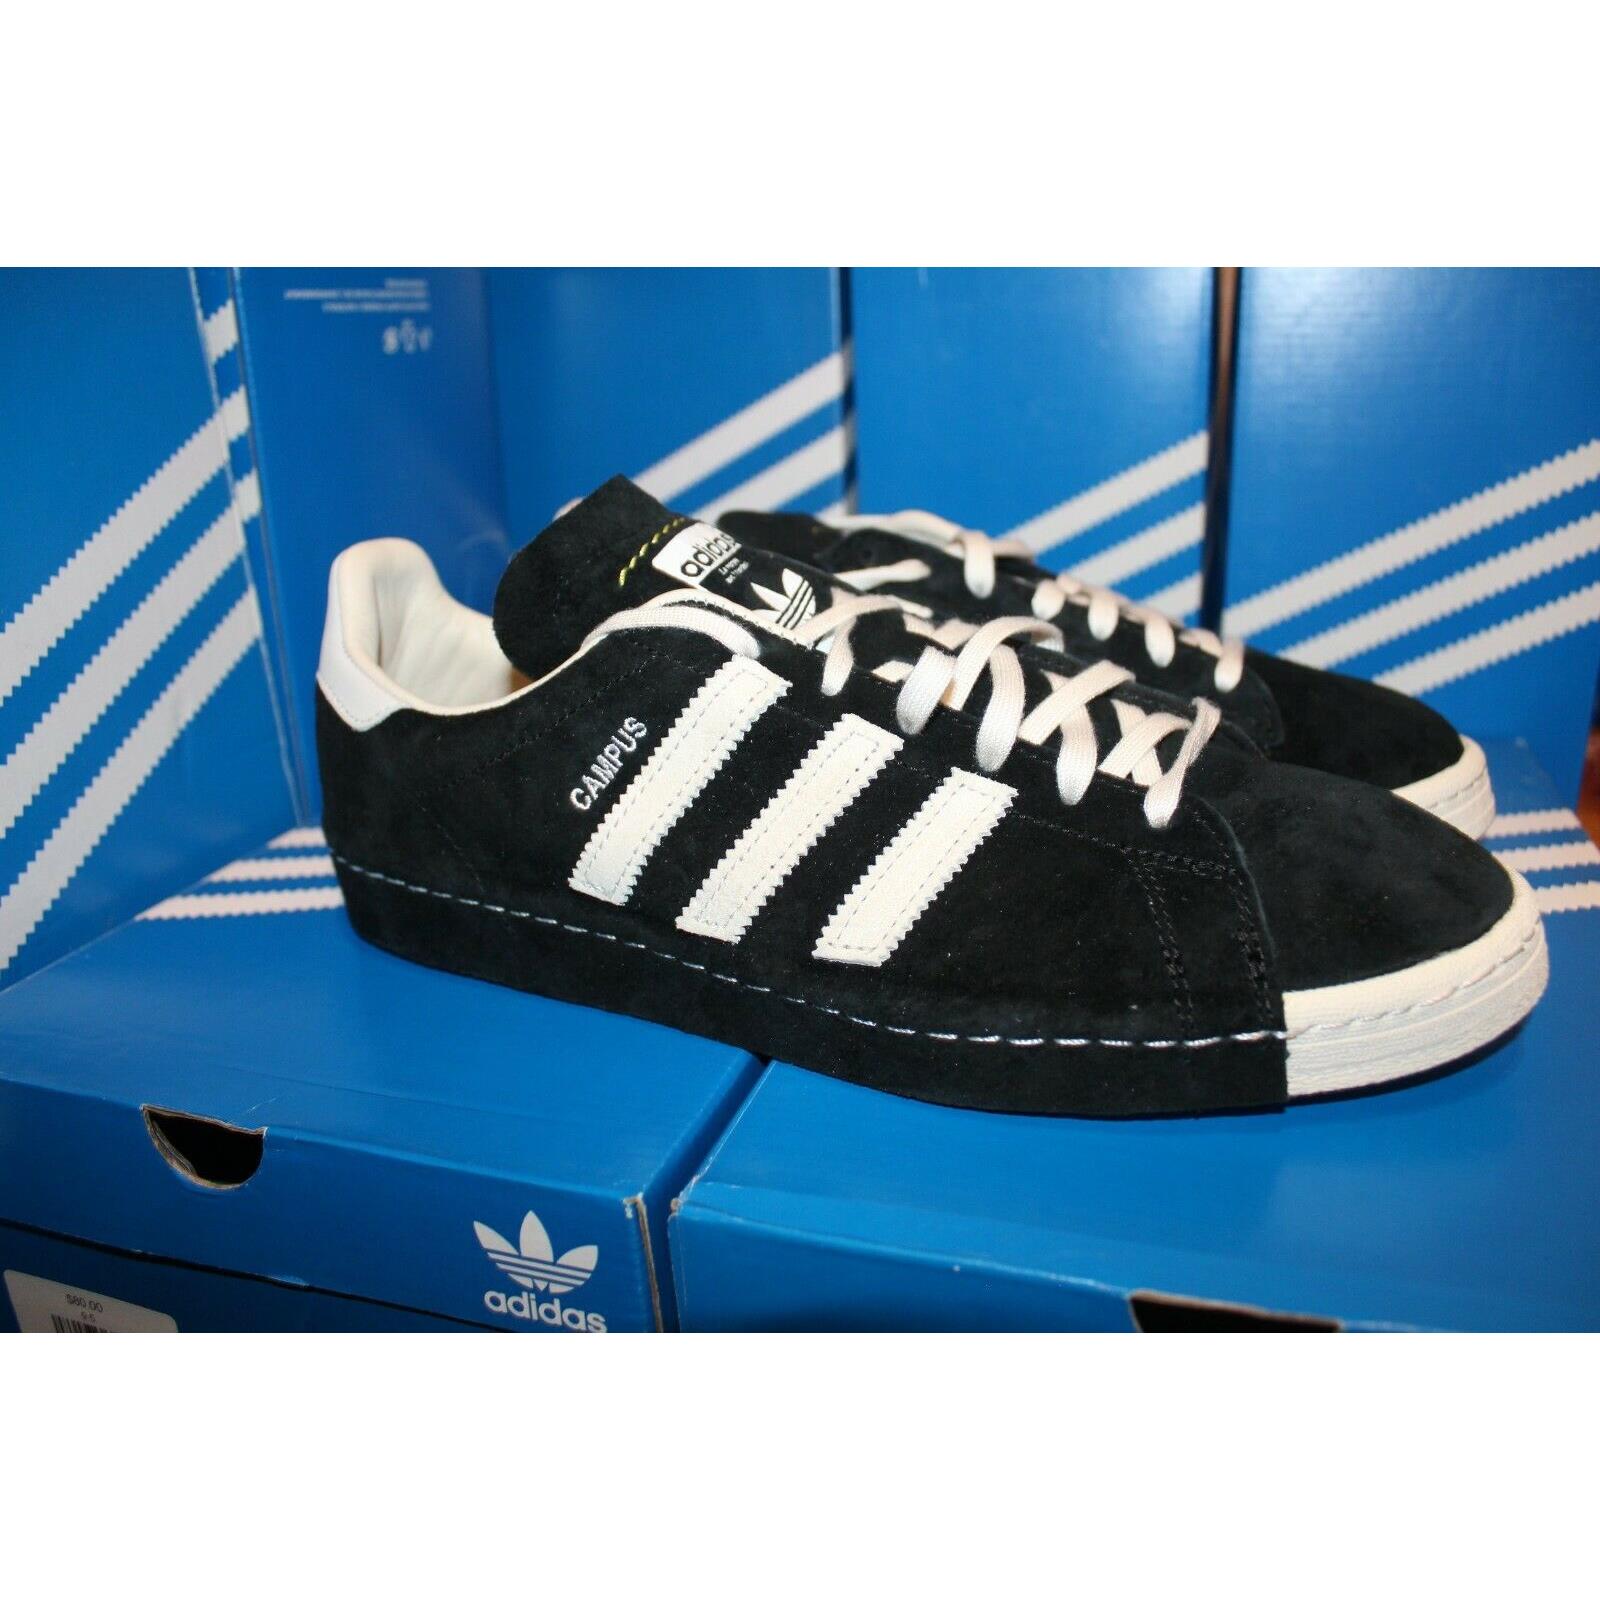 mens adidas trainers 9.5